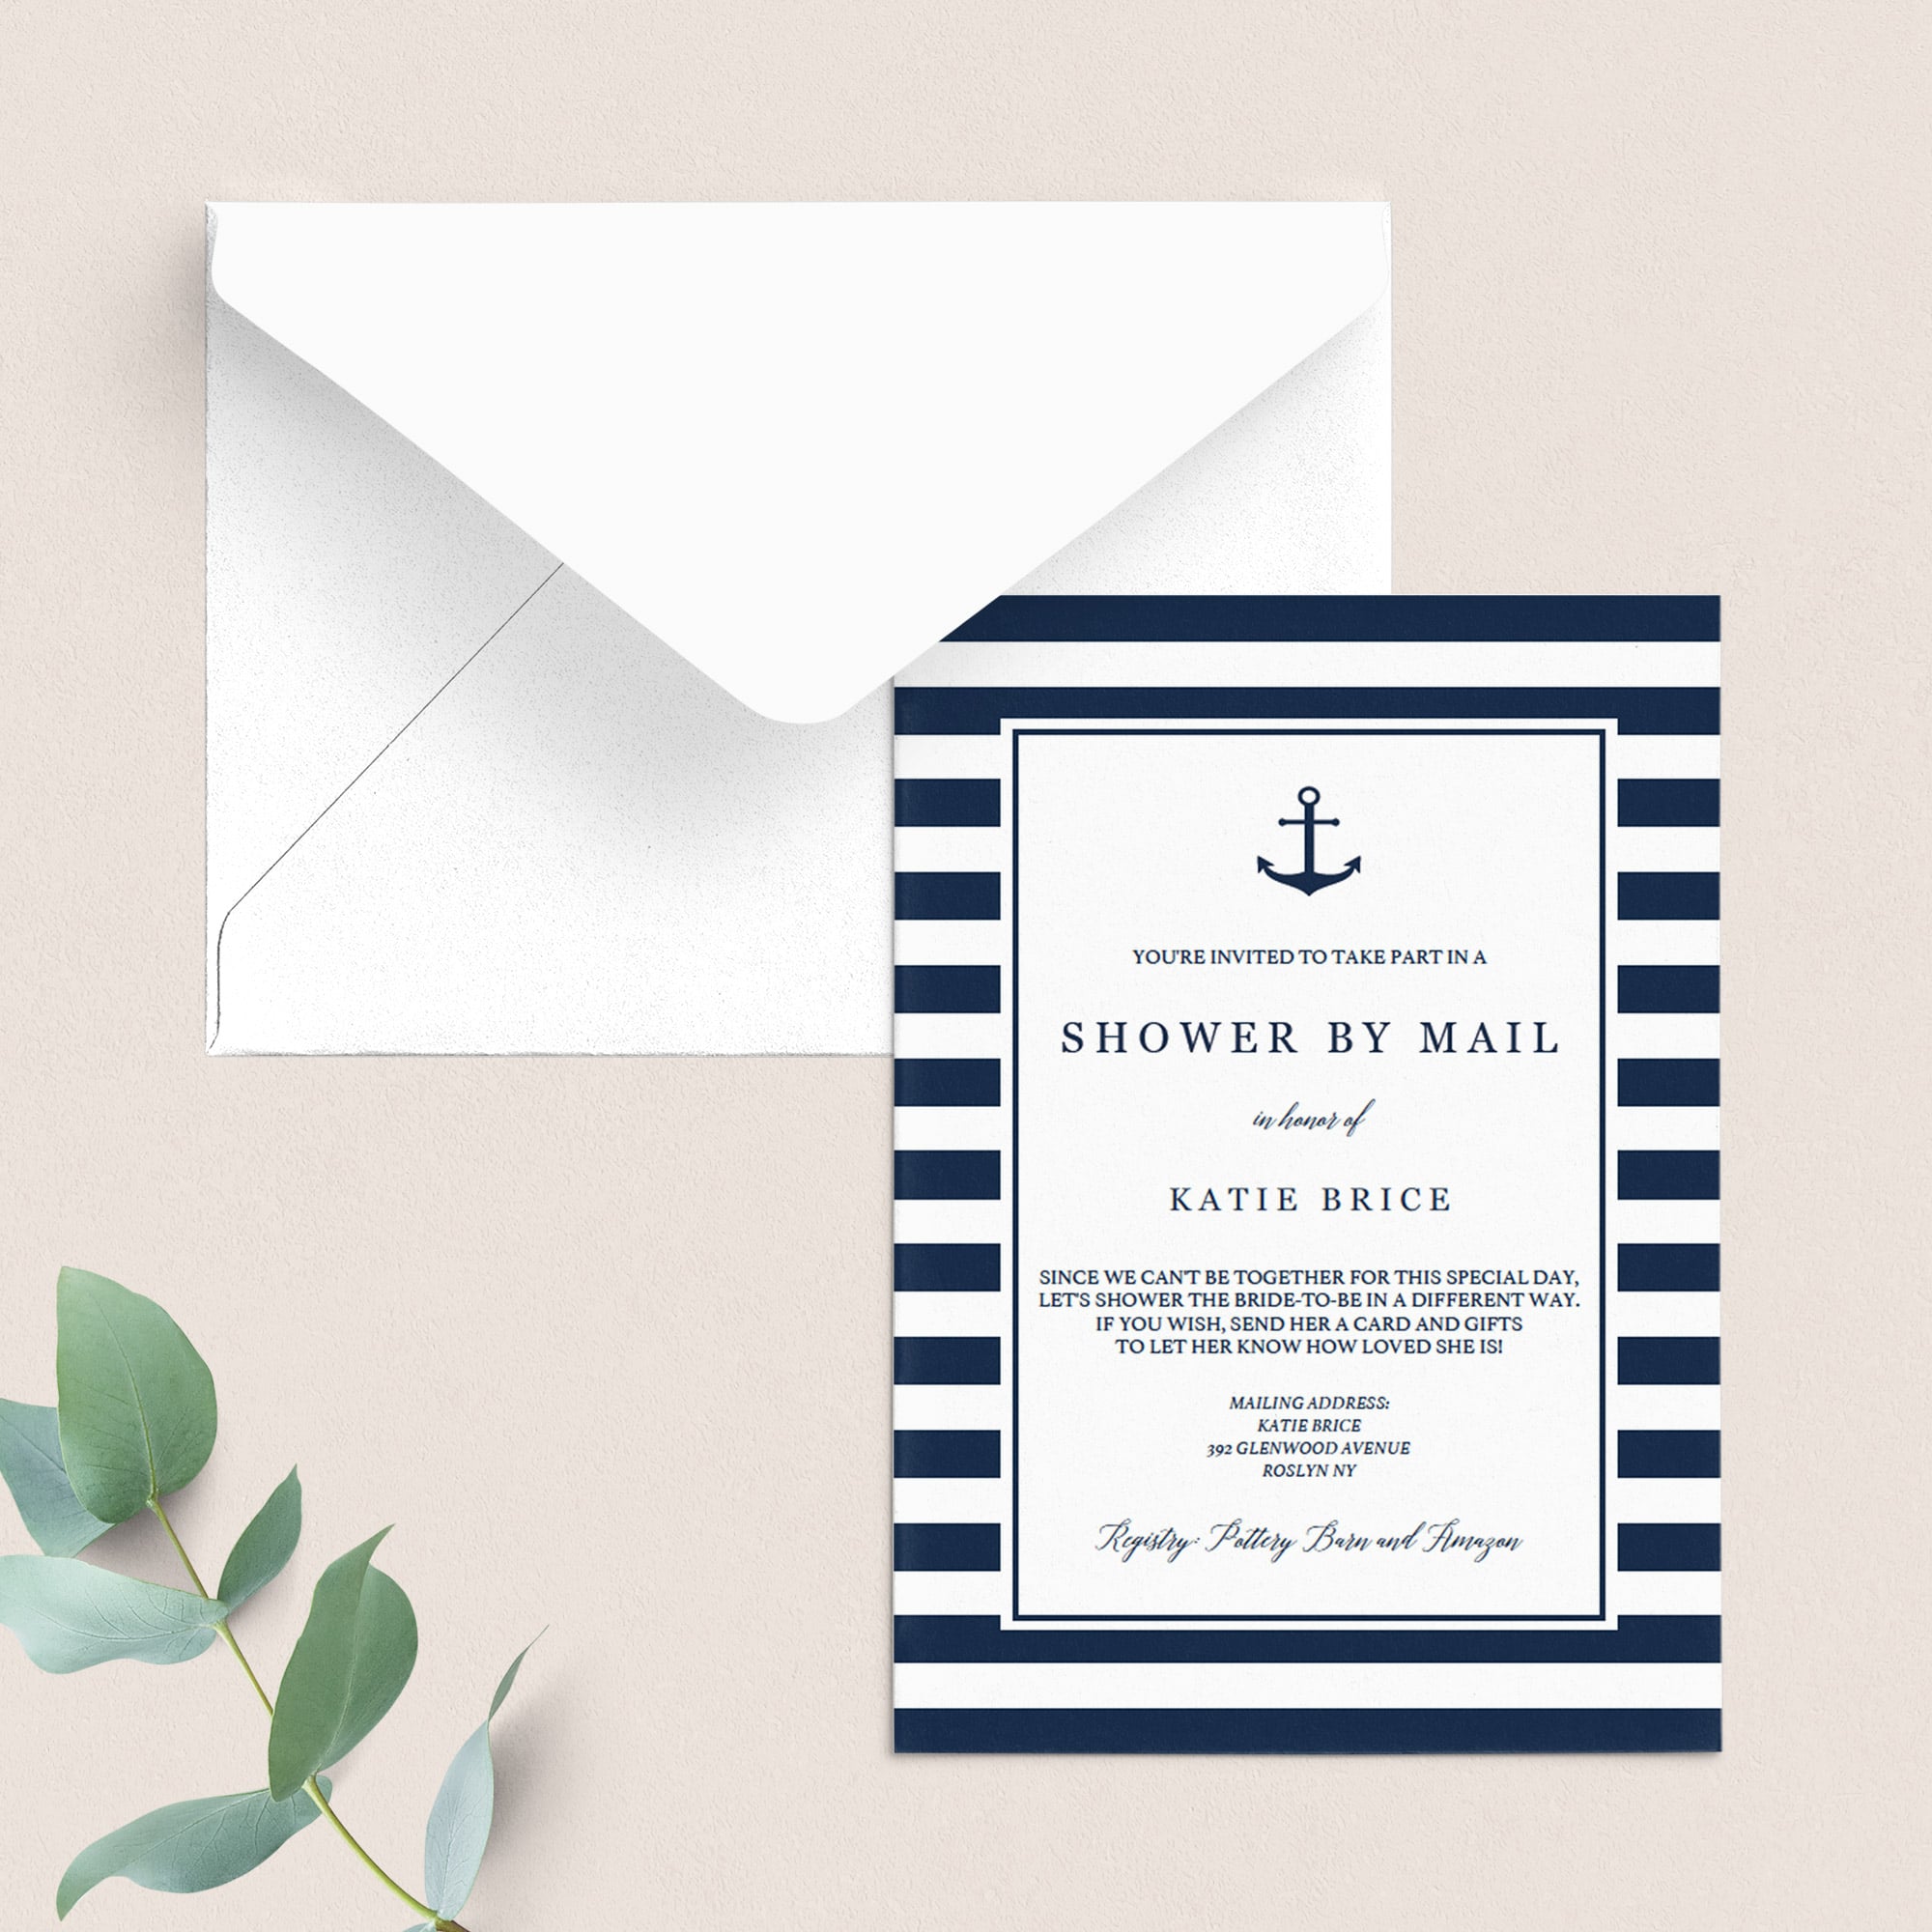 Shower by mail invitation template by LittleSizzle